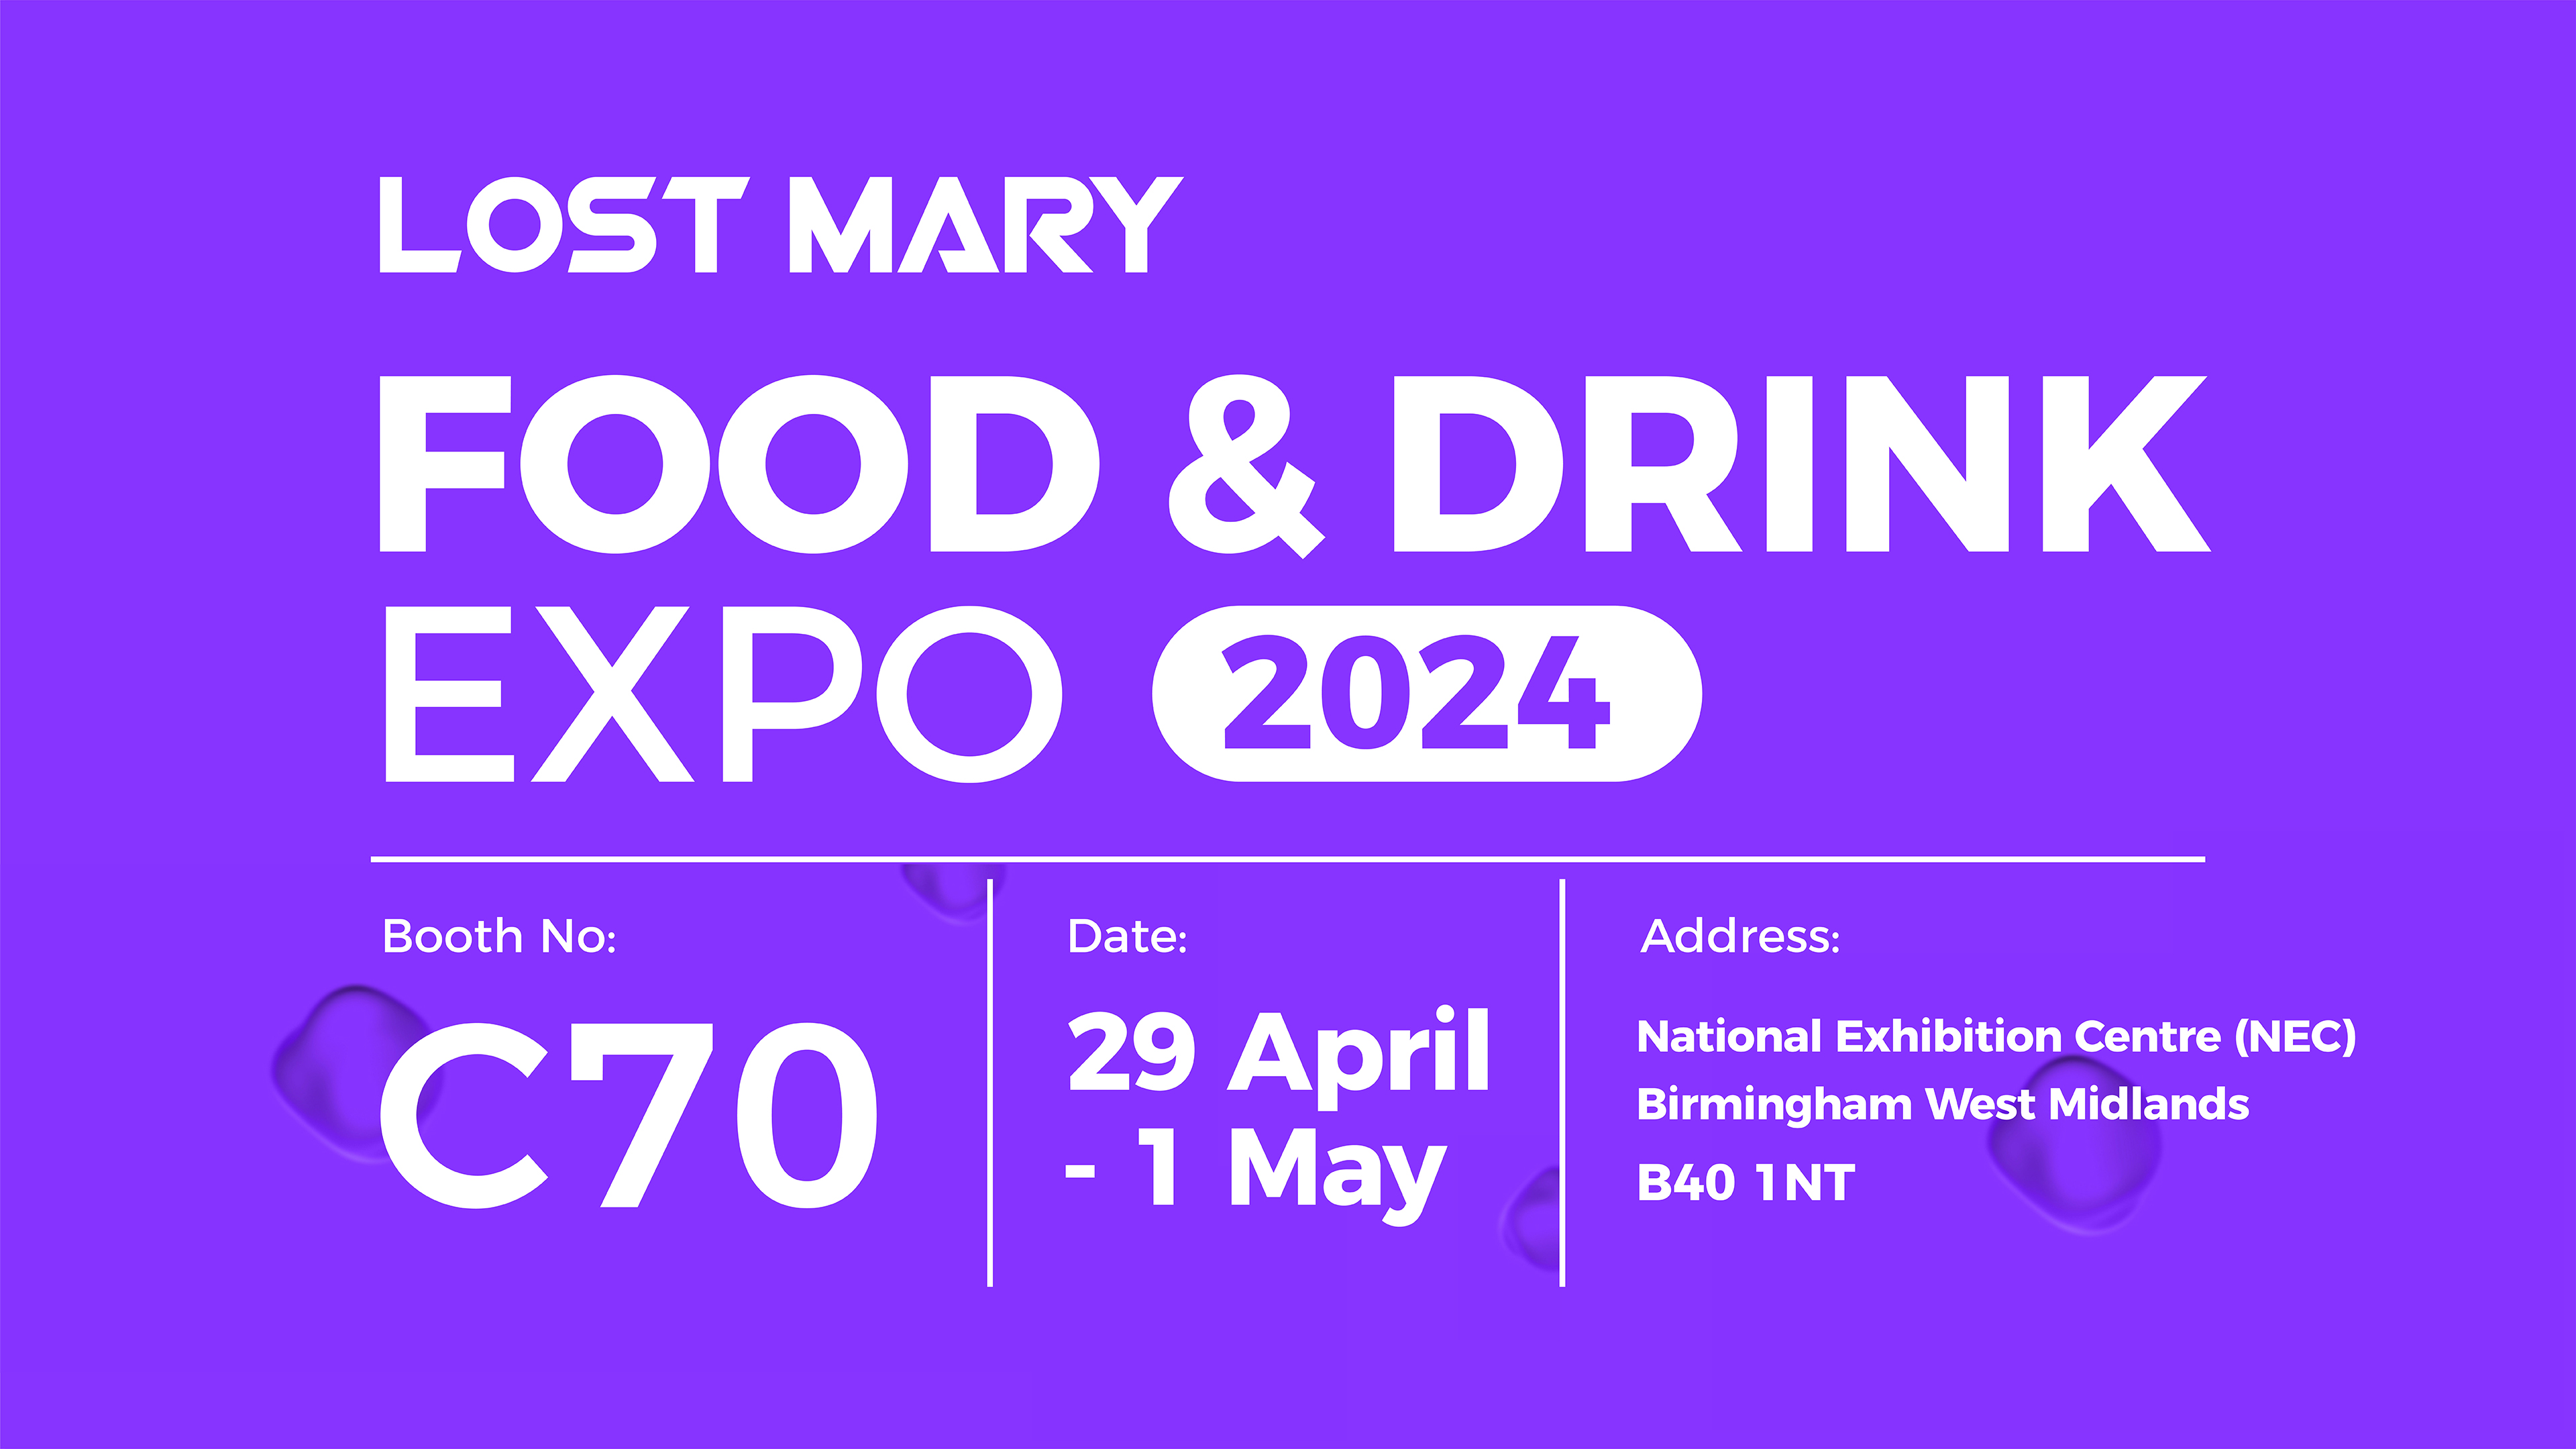 Visit Lost Mary on stand C70 at the Food & Drink Expo 2024